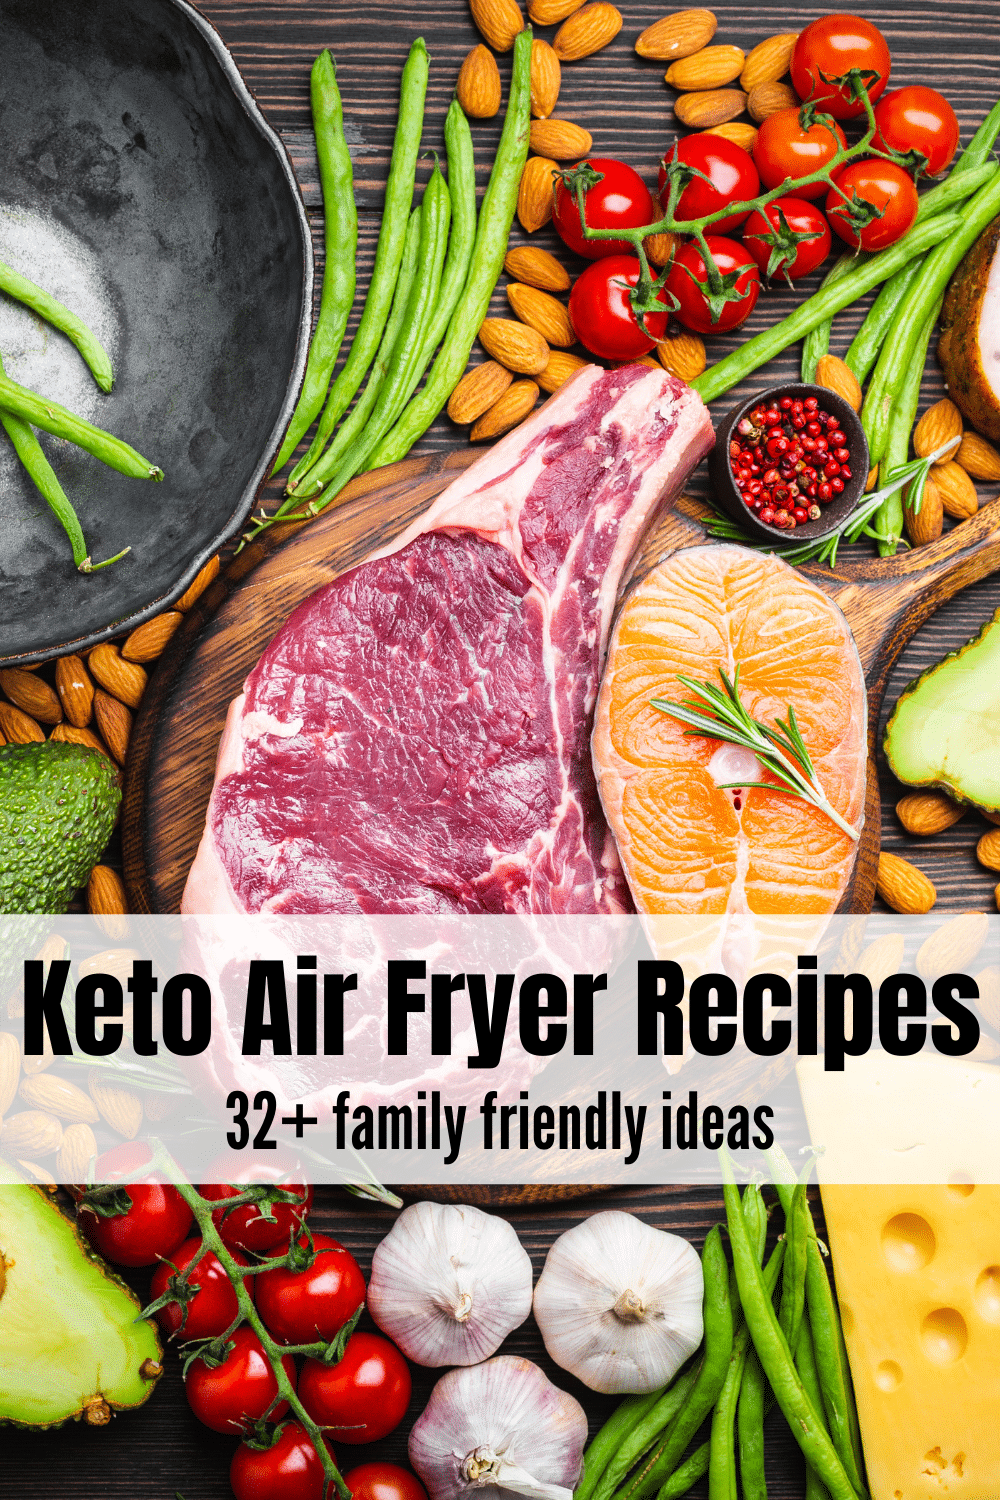 Keto Air Fryer Recipes are becoming as popular as the Keto diet its self. These easy keto air fryer recipes are delicious! #ketoairfryer #ketorecipes #ketoairfryerrecipes #airfryerketo via @vegetarianmamma